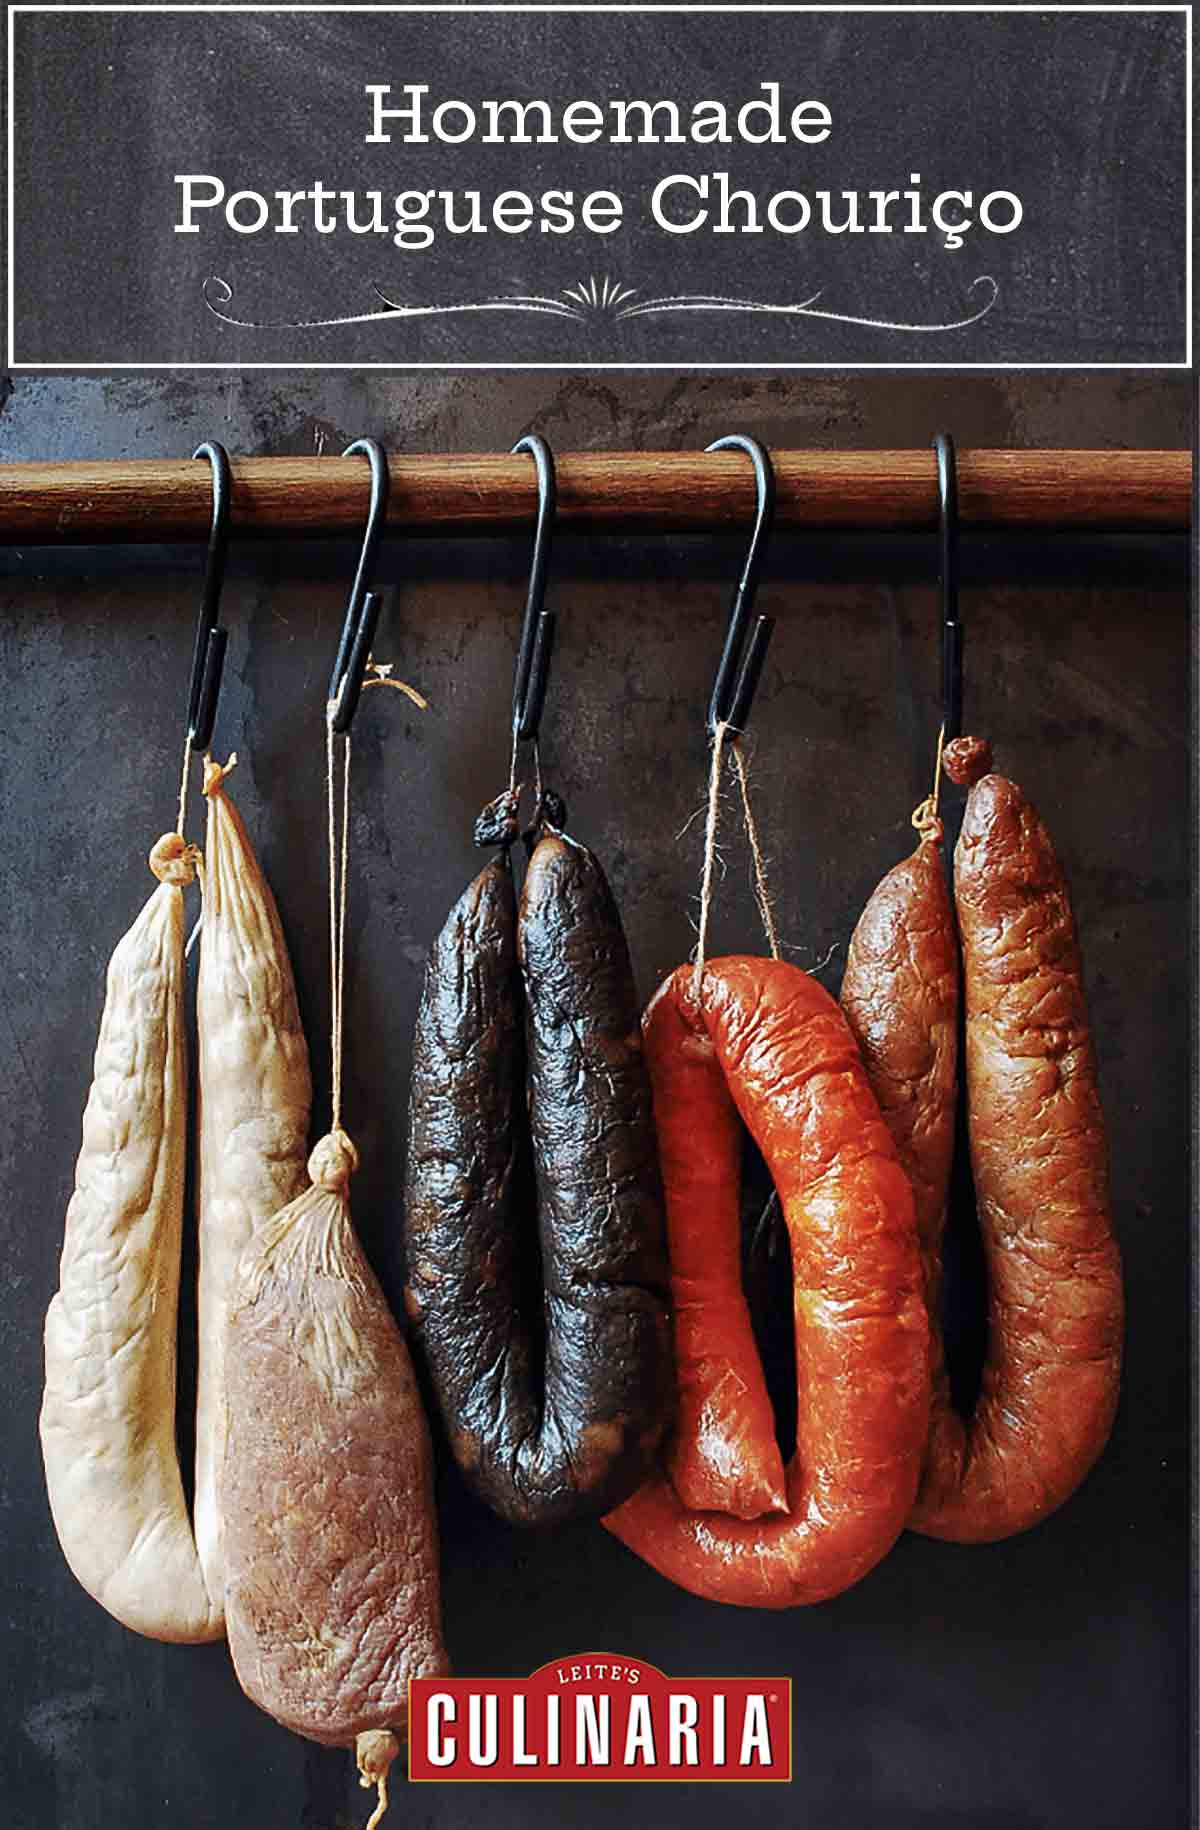 Five links of common Portuguese sausages, including homemade chouriço, hanging from hooks on a wooden dowel